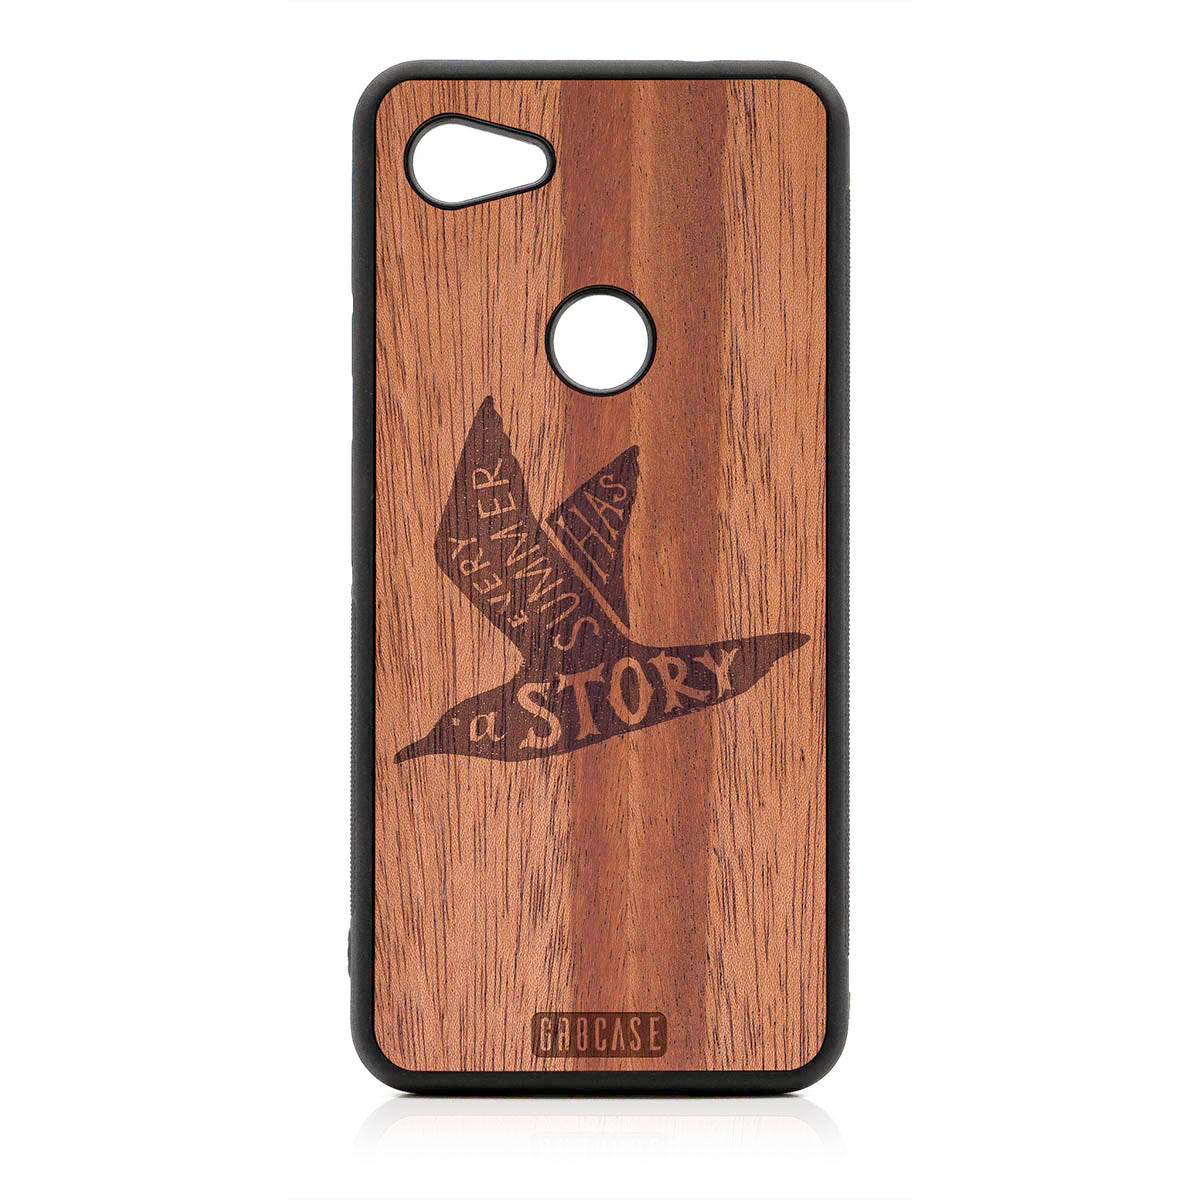 Every Summer Has A Story (Seagull) Design Wood Case For Google Pixel 3A